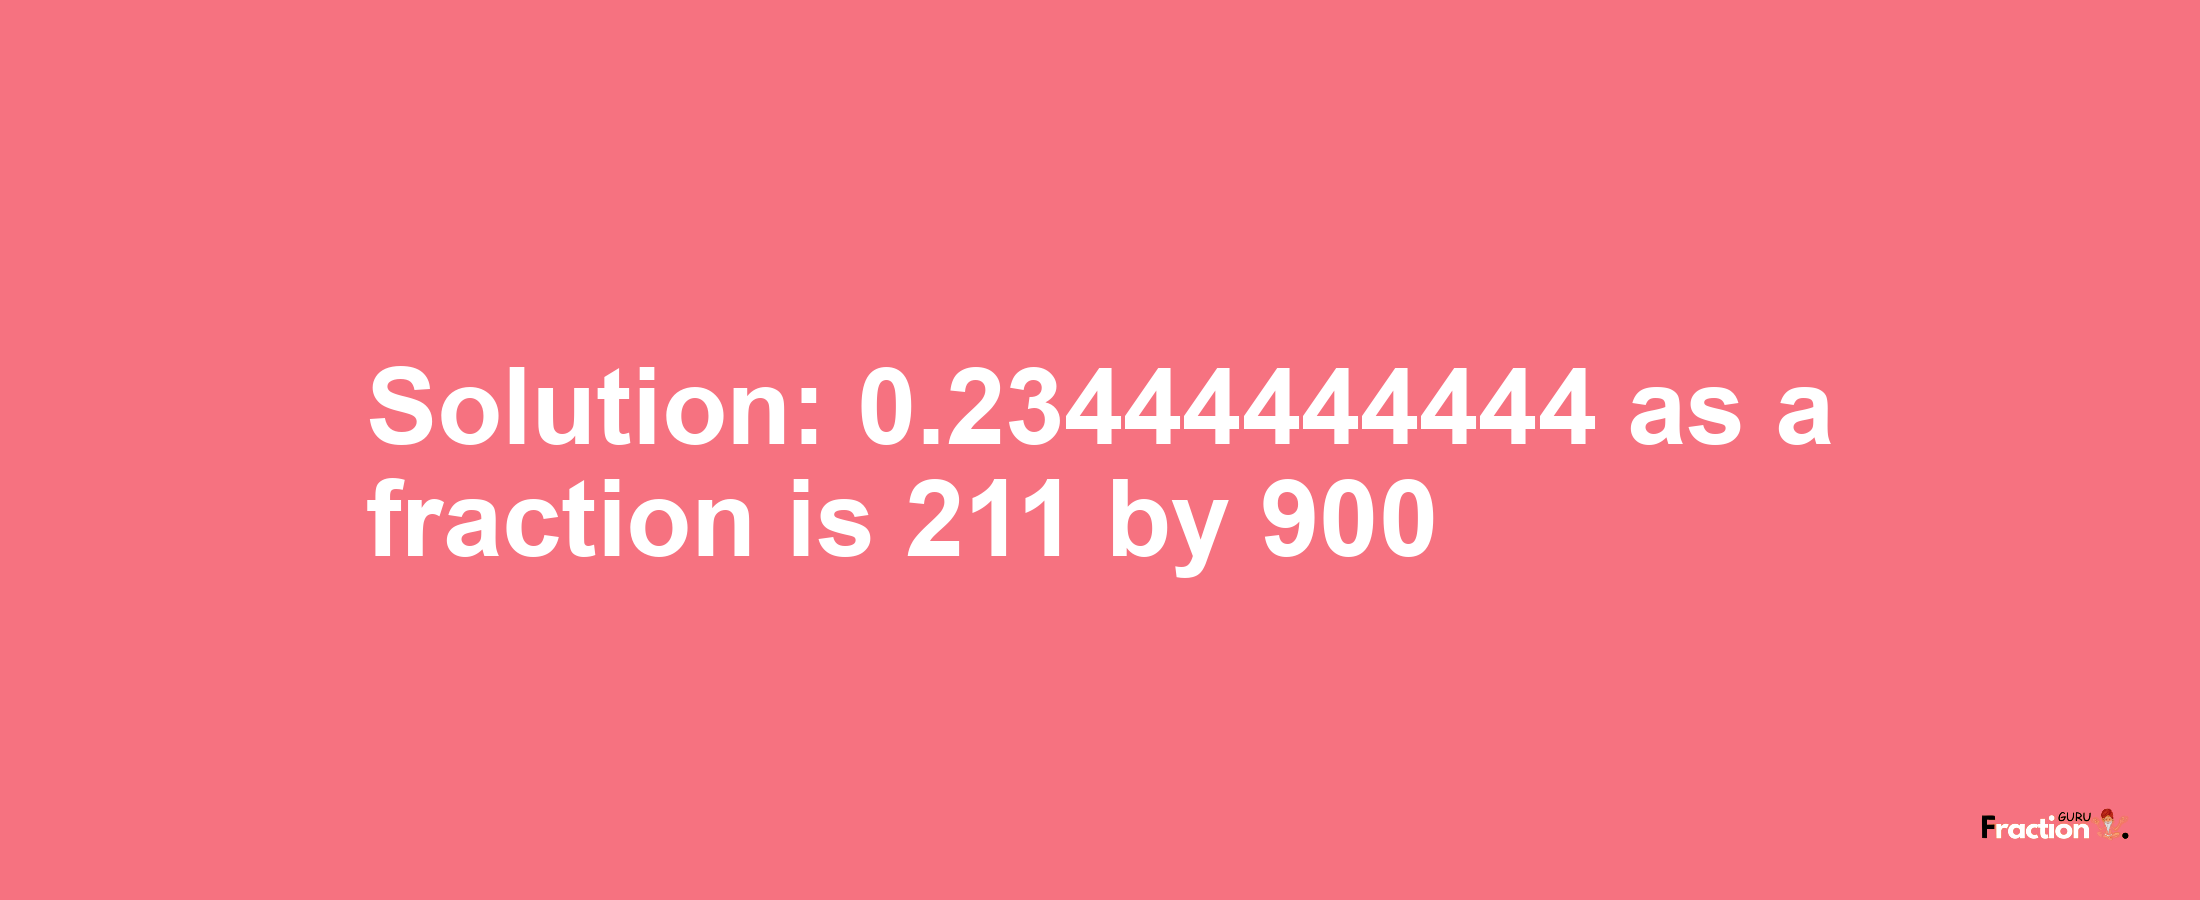 Solution:0.23444444444 as a fraction is 211/900